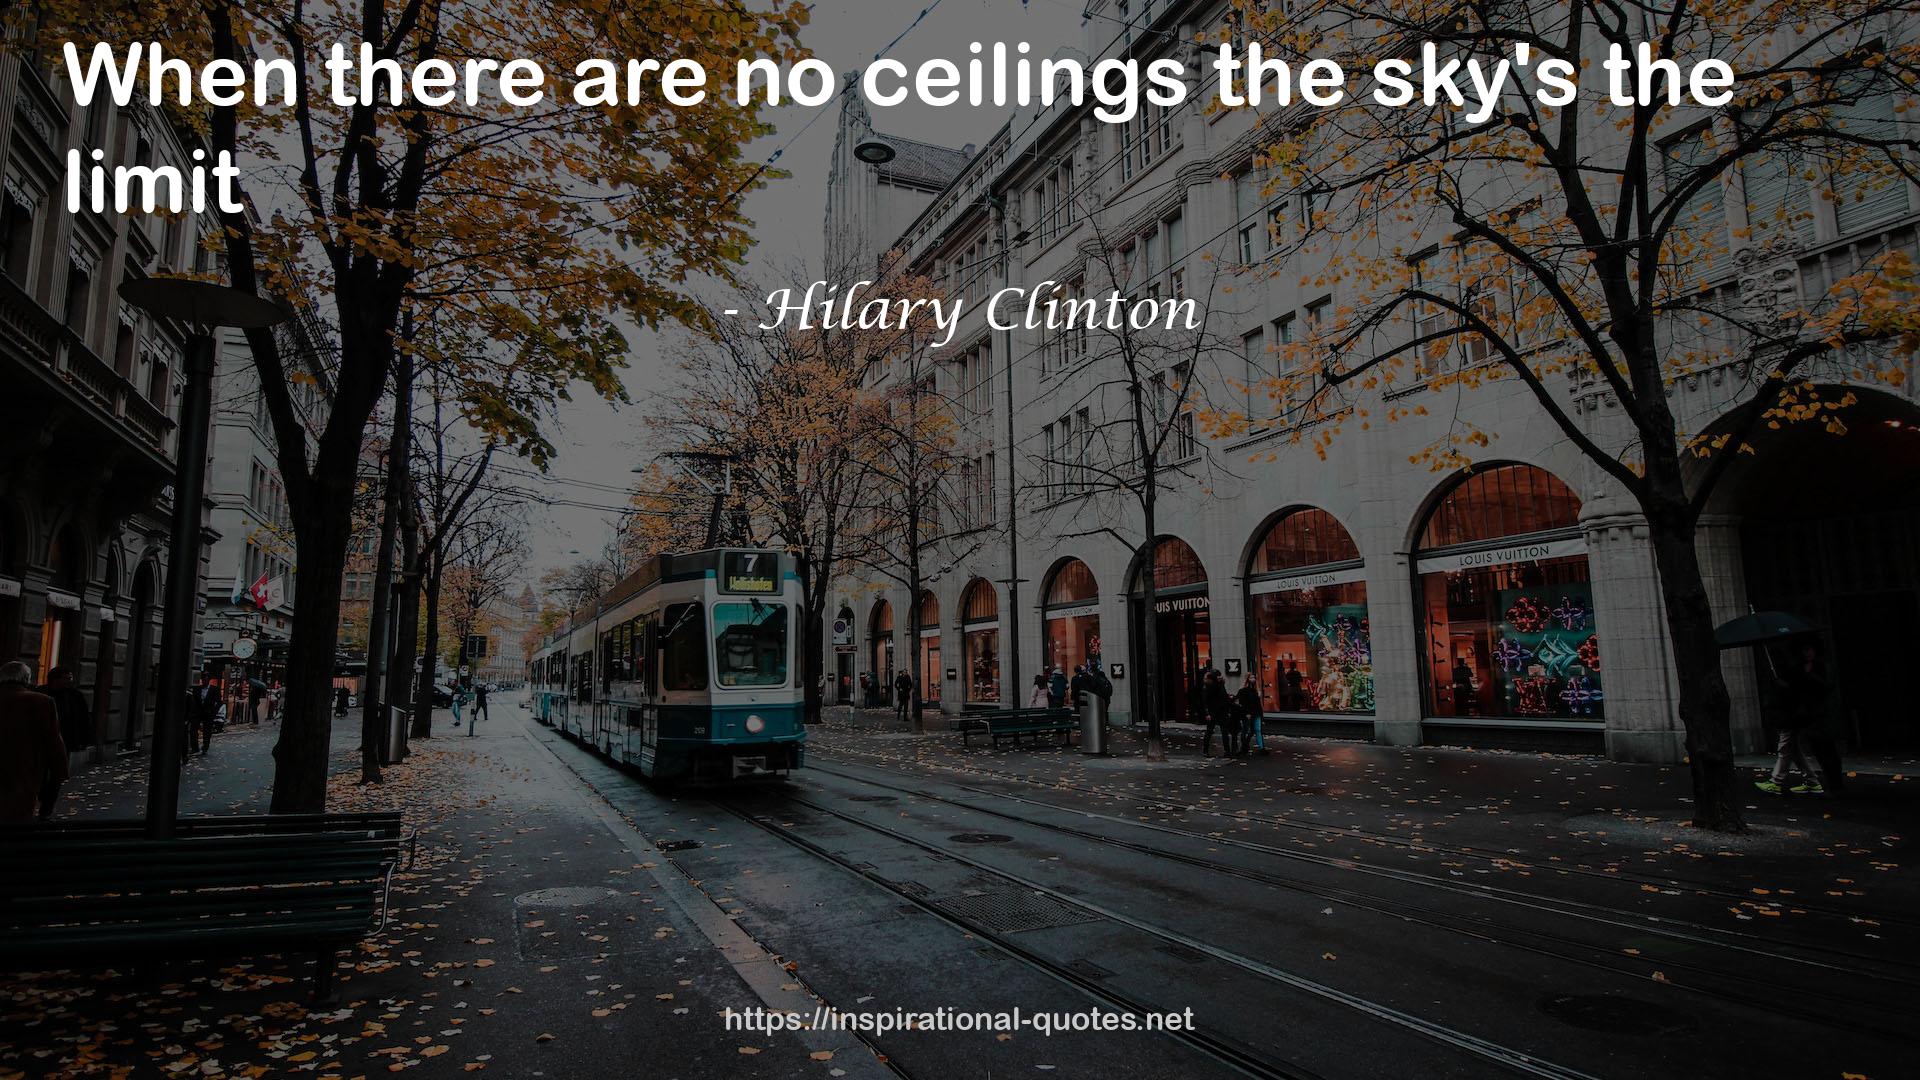 Hilary Clinton QUOTES